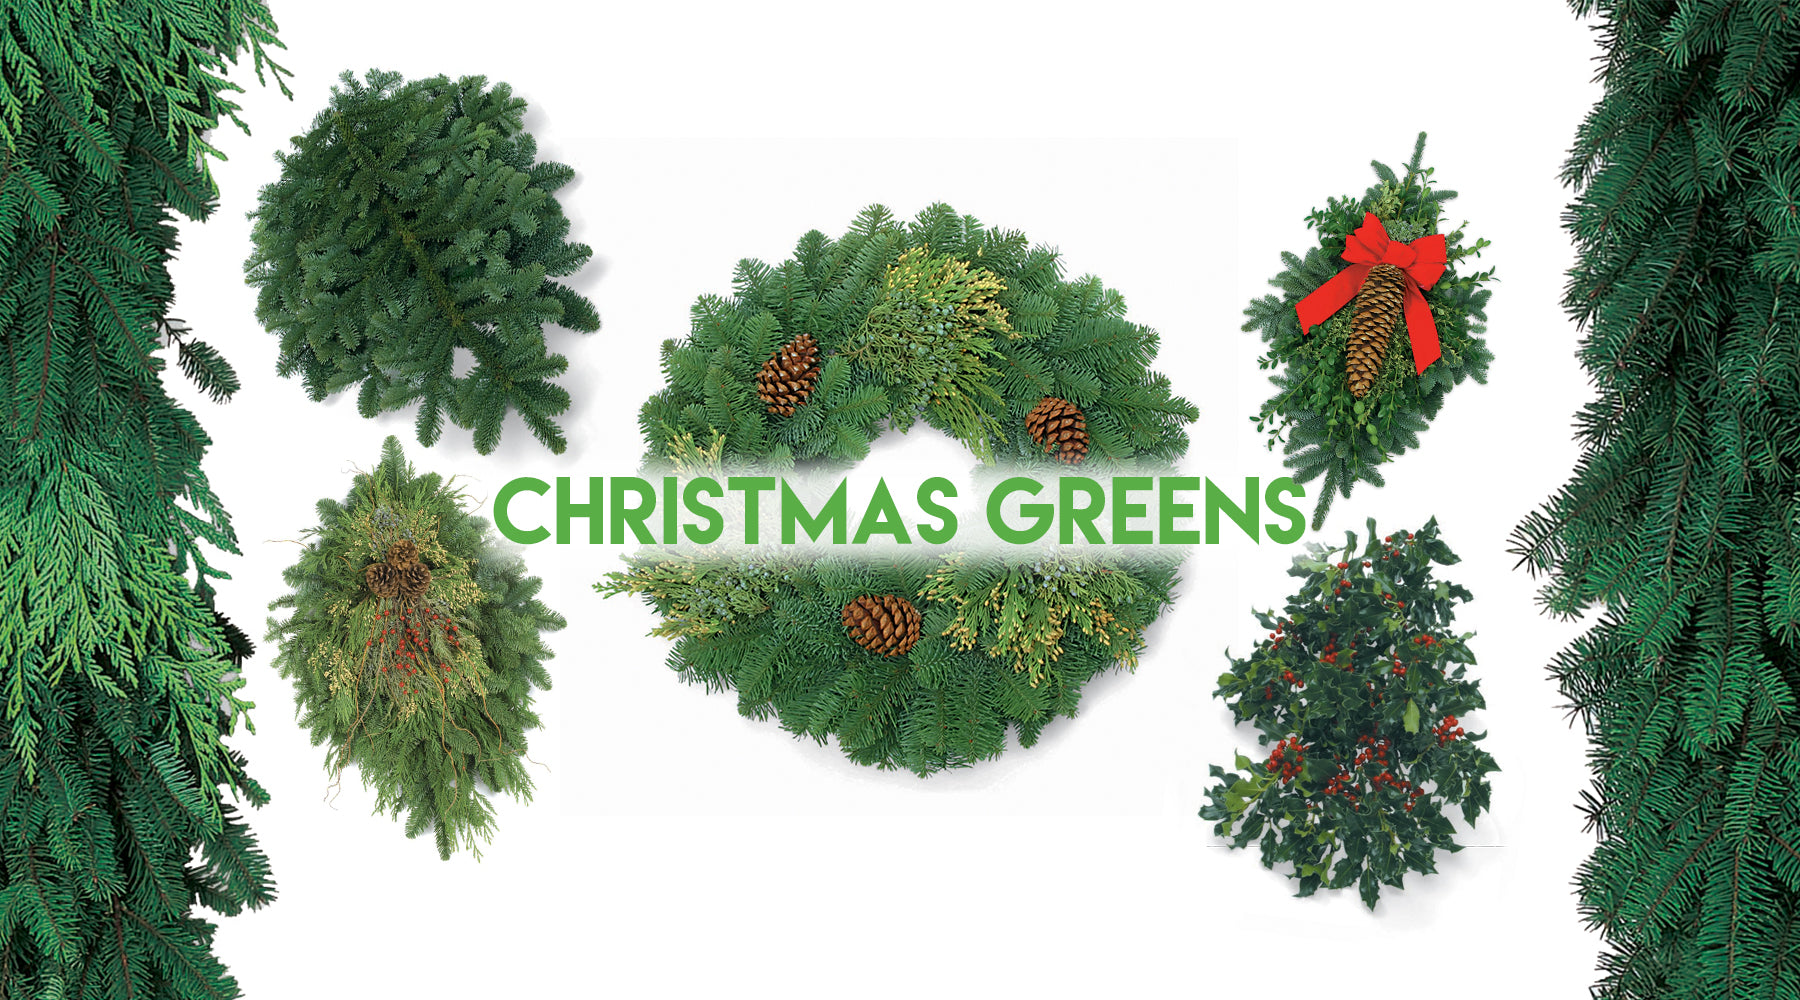 How To Video - Vol. 2: Pre-Order Christmas Greens Online